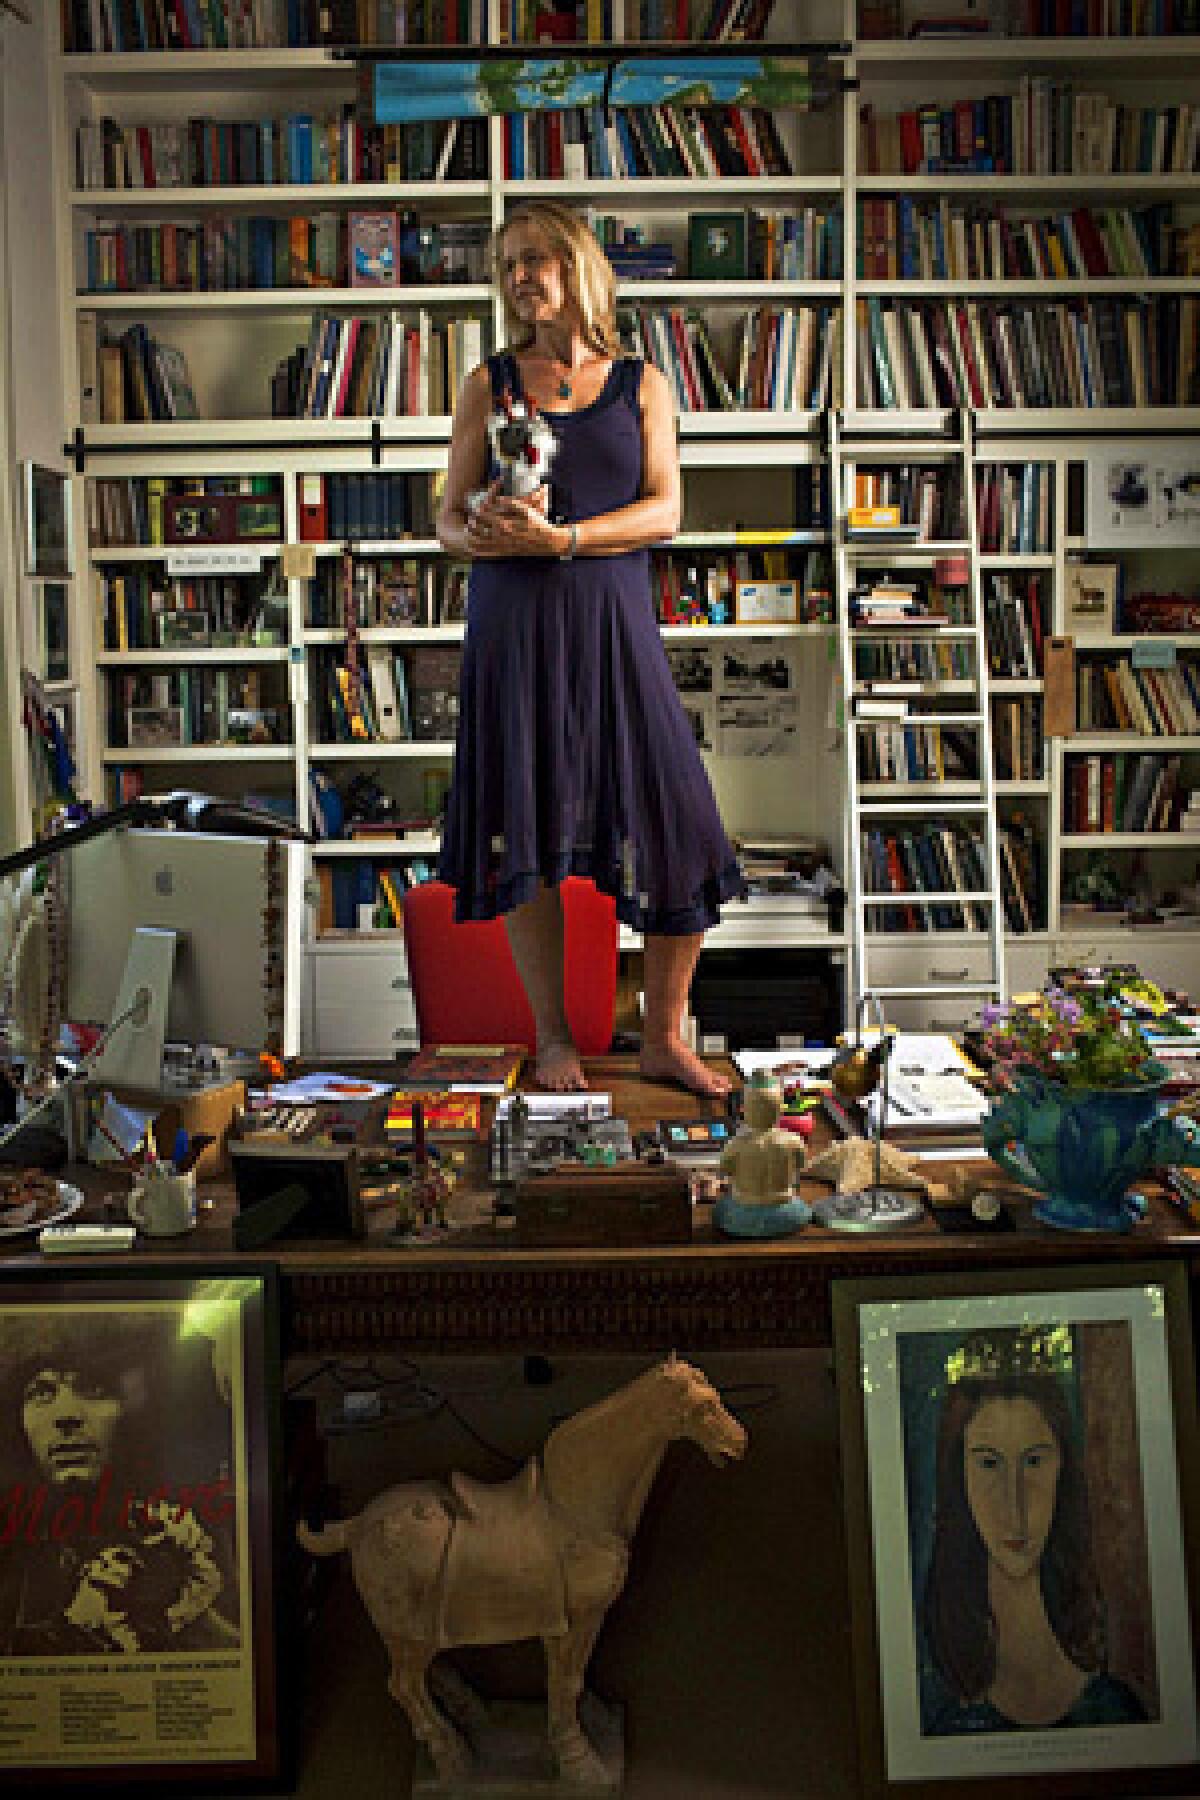 Cornelia Funke, best-selling author of the "Inkheart" series, at her Beverly Hills home -- on top of her desk with a stuffed dragon.